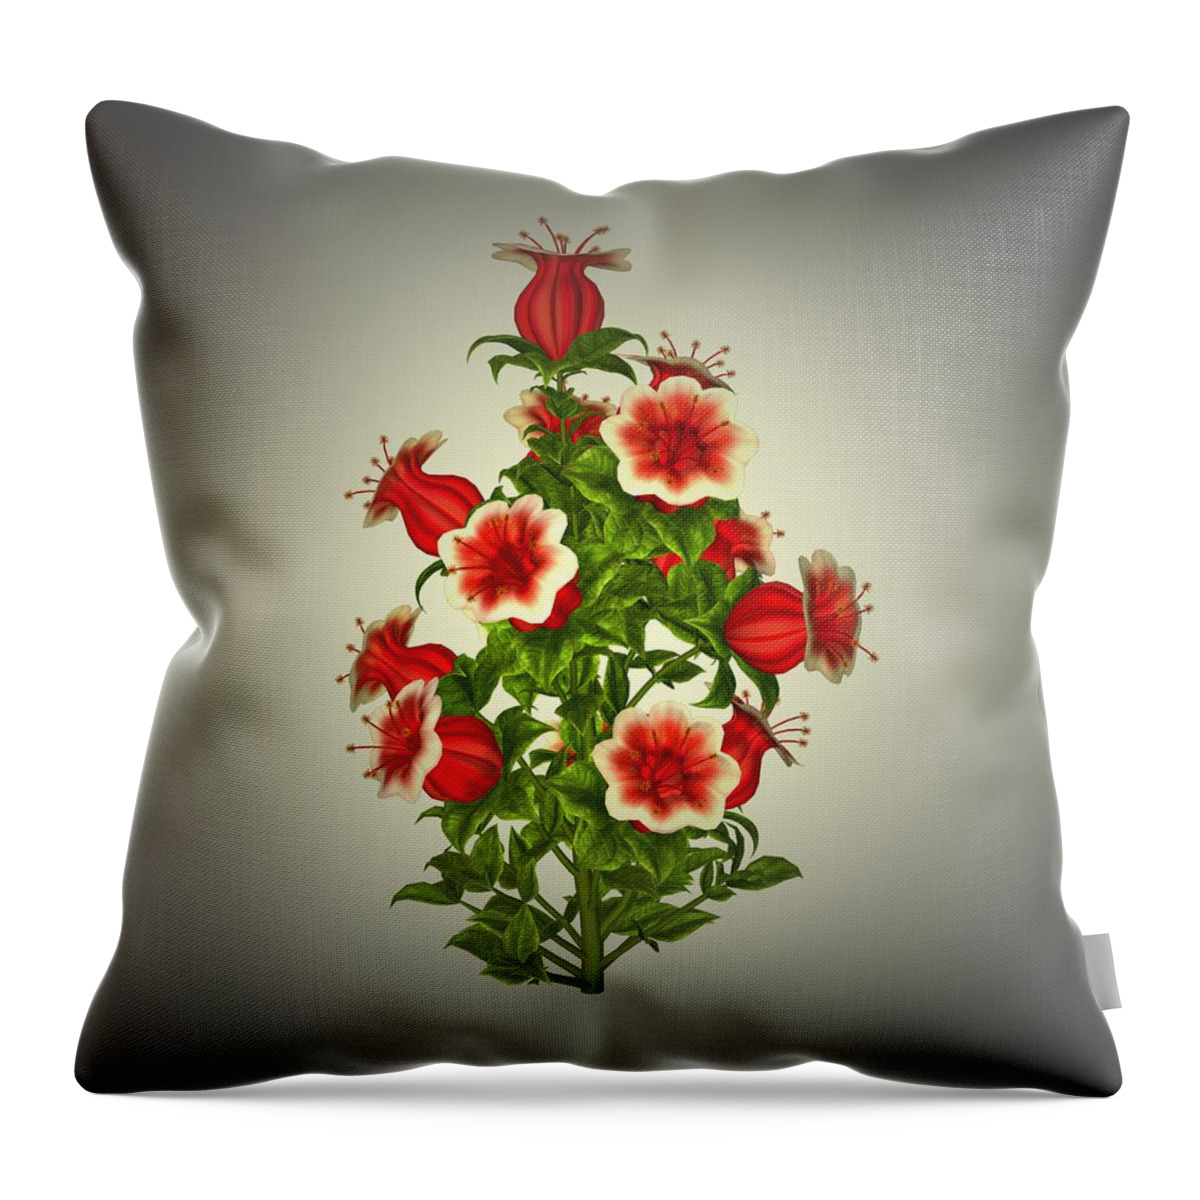 Garden Throw Pillow featuring the painting Garden Flowers 8 by Movie Poster Prints